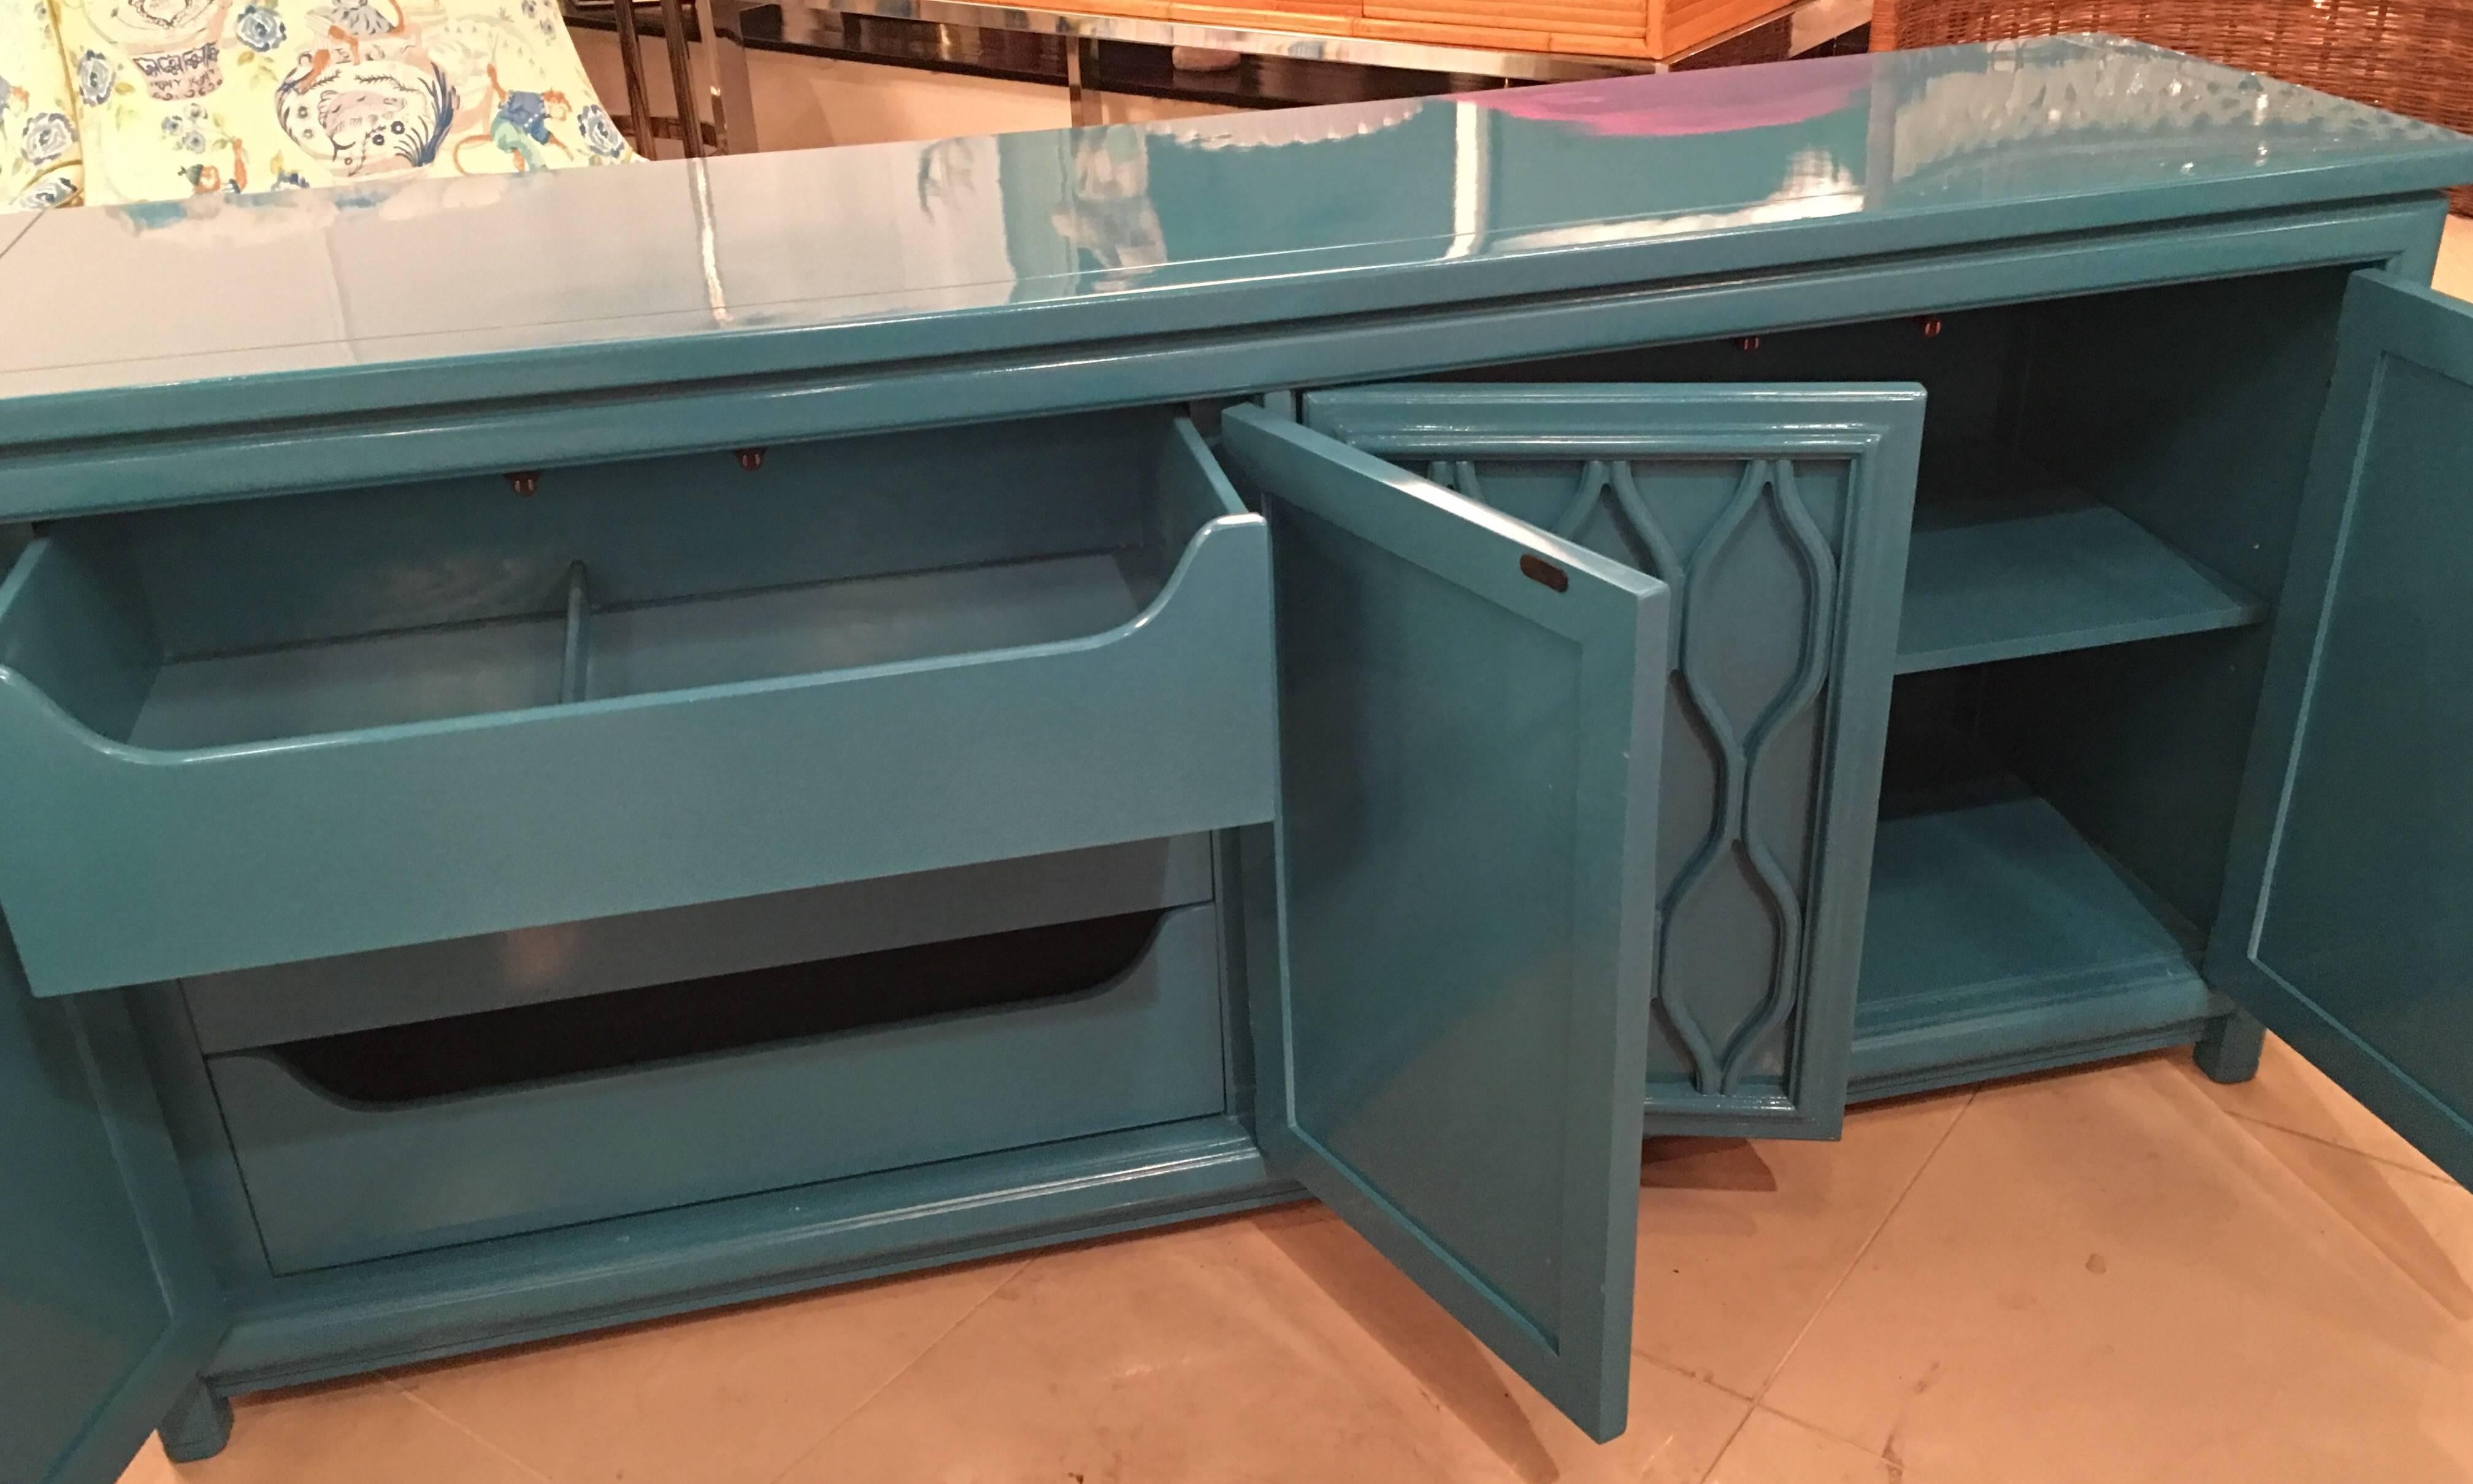 Late 20th Century Lacquered Credenza Buffet Sideboard Blue Teal Dresser Hollywood Regency Vintage 